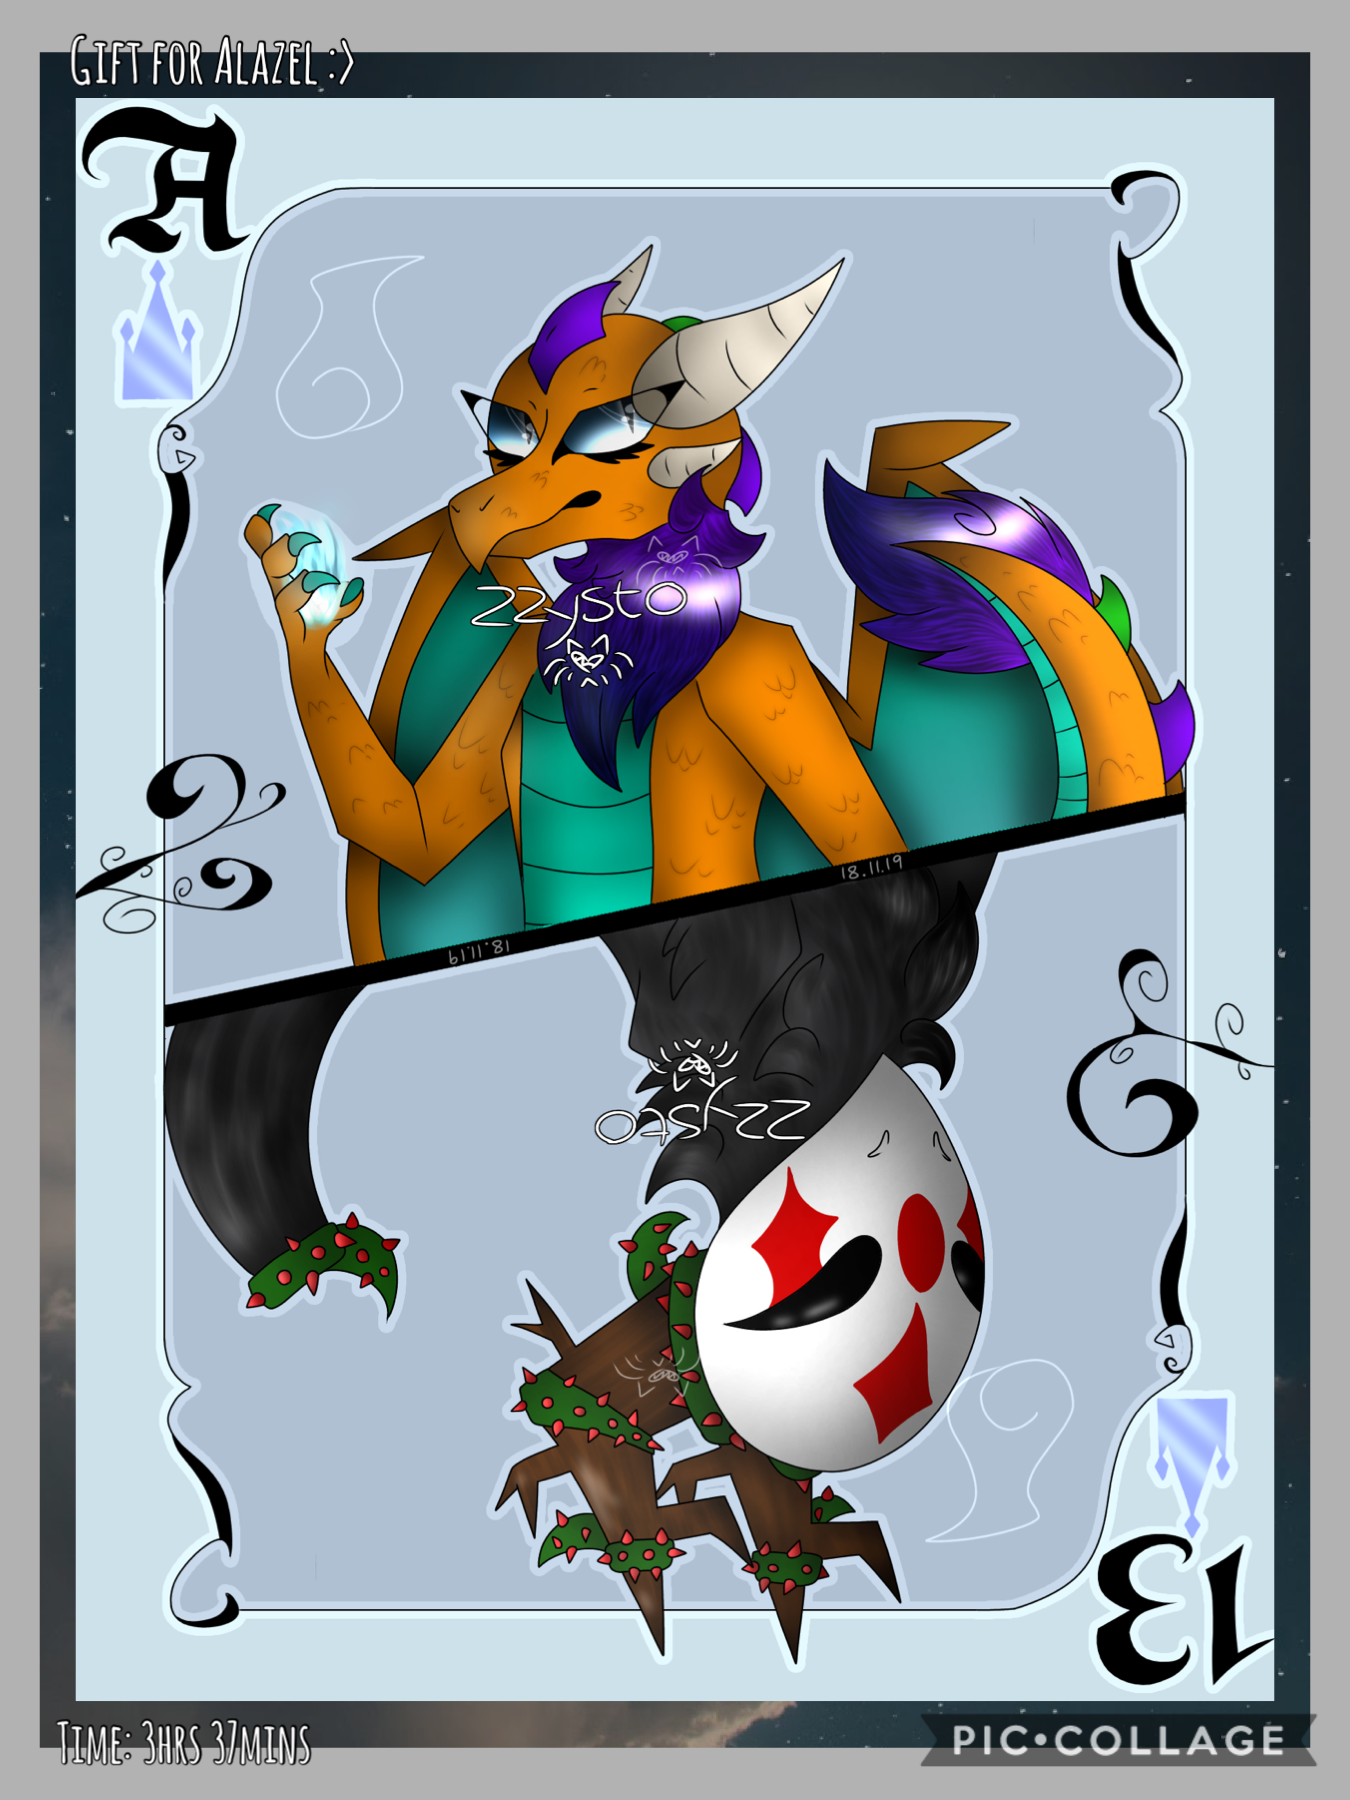 🔮Tap🔮
This is going to be my new series: The Deck, or Damien’s Deck, where I draw my ocs as cards! 
I decided to draw a gift for Alazel because I feel like I haven’t been a good friend as late,, but I’m really proud of how this turned out, hence why I’m p